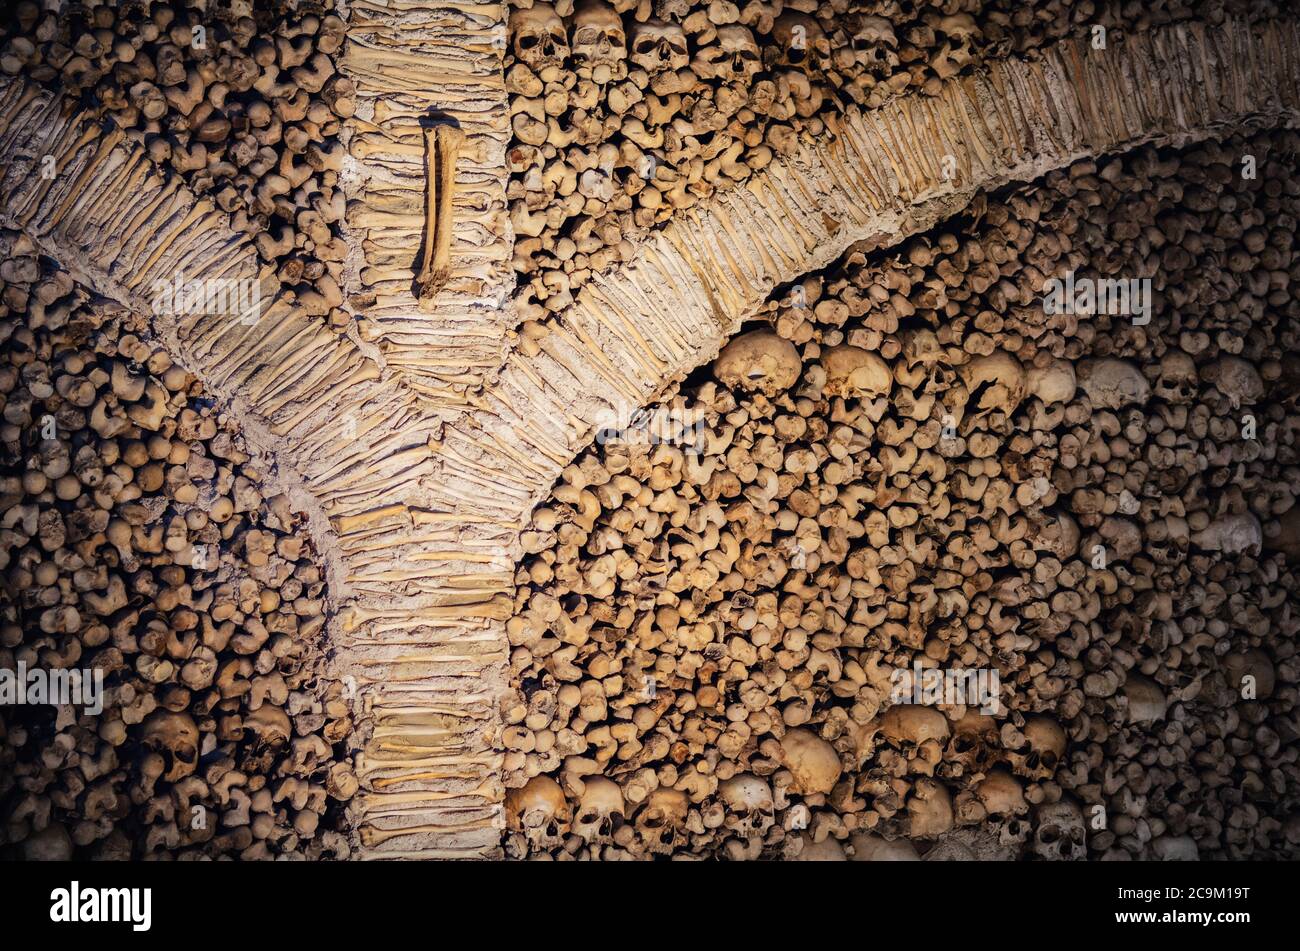 EVORA, PORTUGAL - FEBRUARY 1, 2019: Detail of the Capela dos Ossos, famous interior chapel covered by human bones inside the church of Saint Francis i Stock Photo